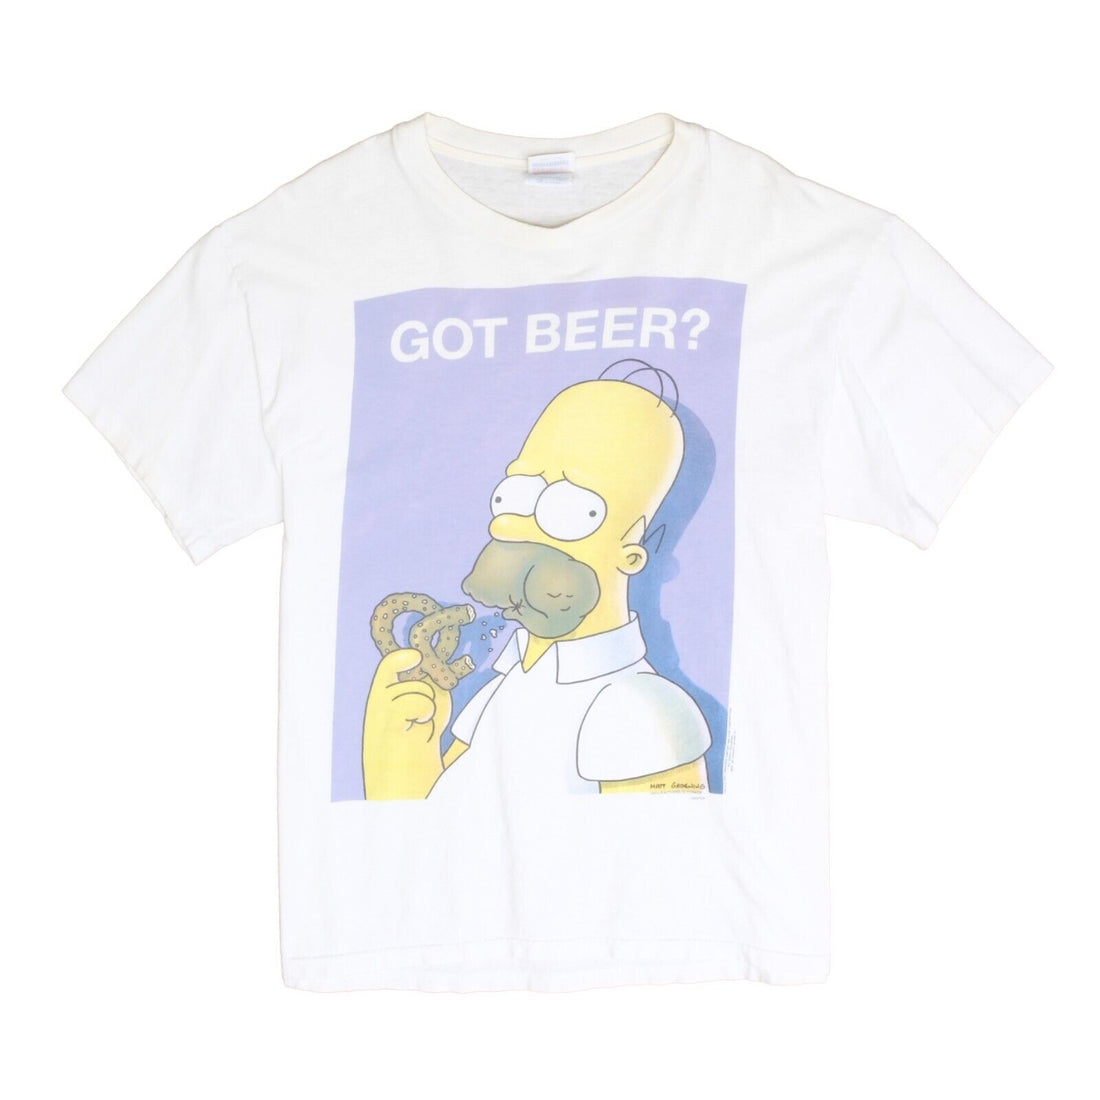 Vintage The Simpsons Got Beer T-Shirt Size Large Homer Parody Promo 1995 90s